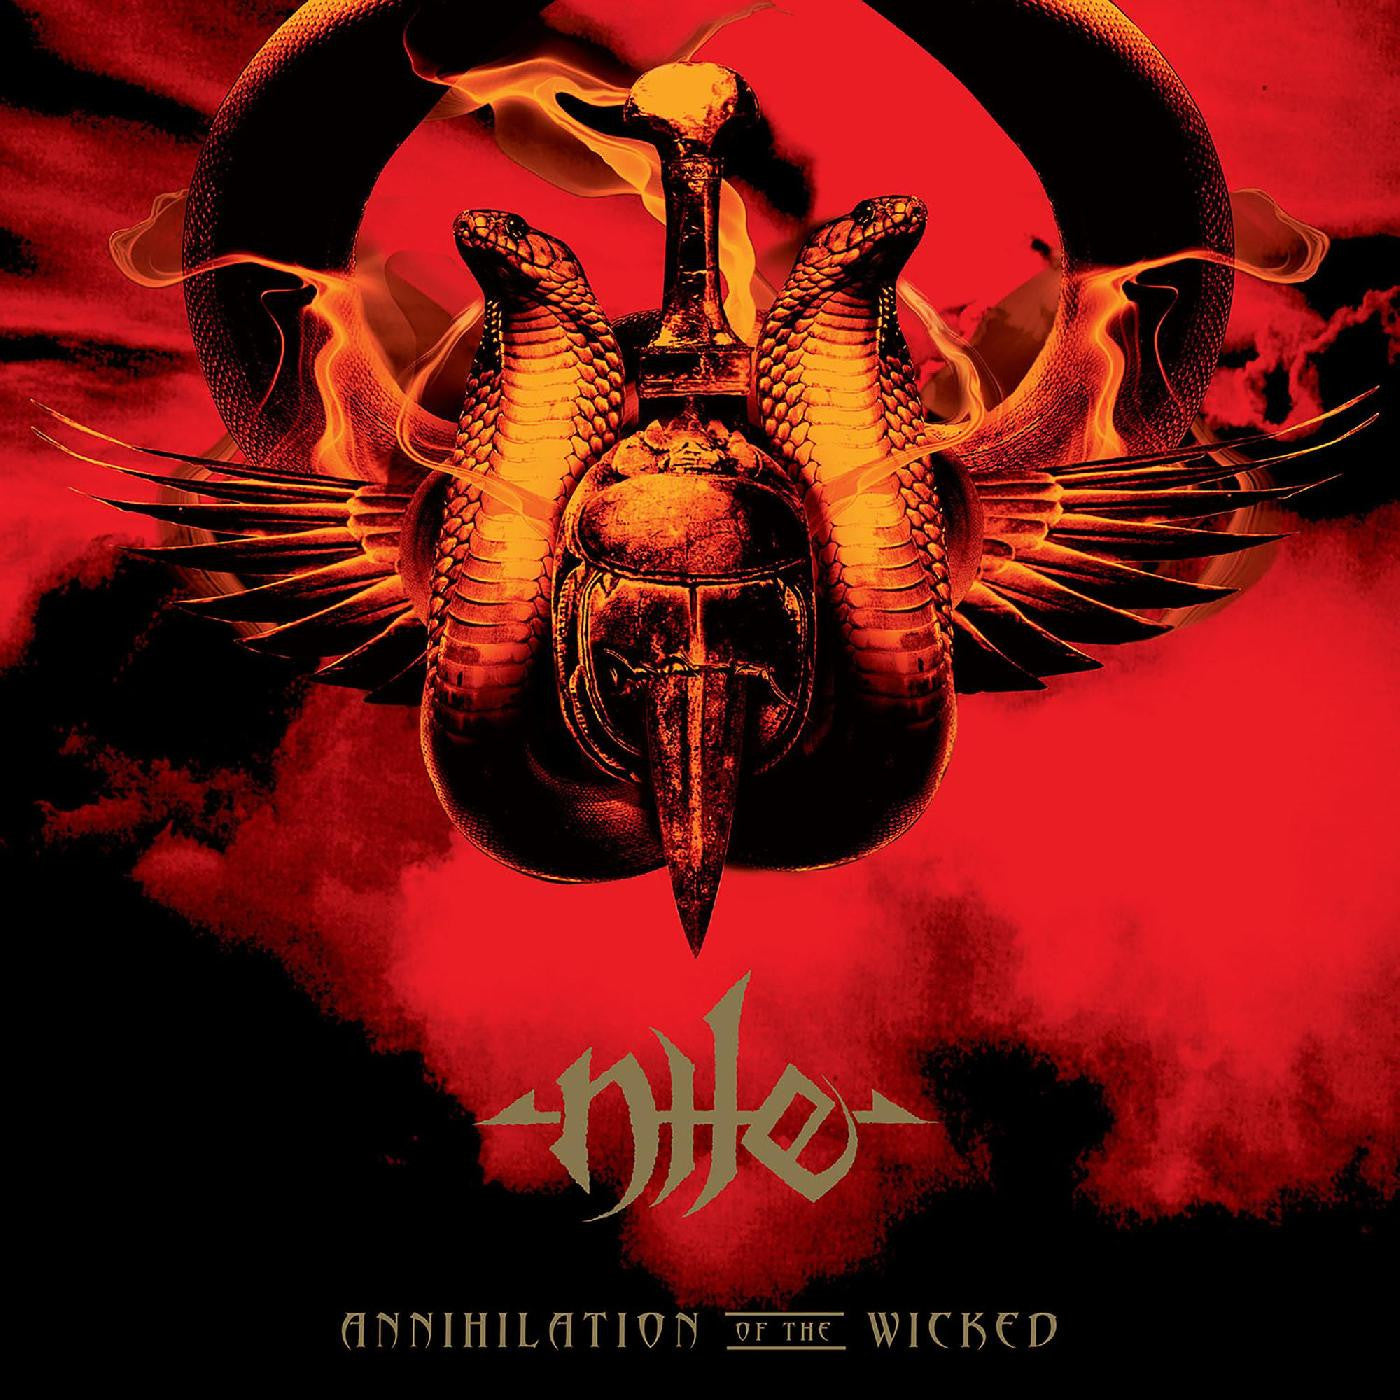 NILE - Annihilation of the Wicked 2LP